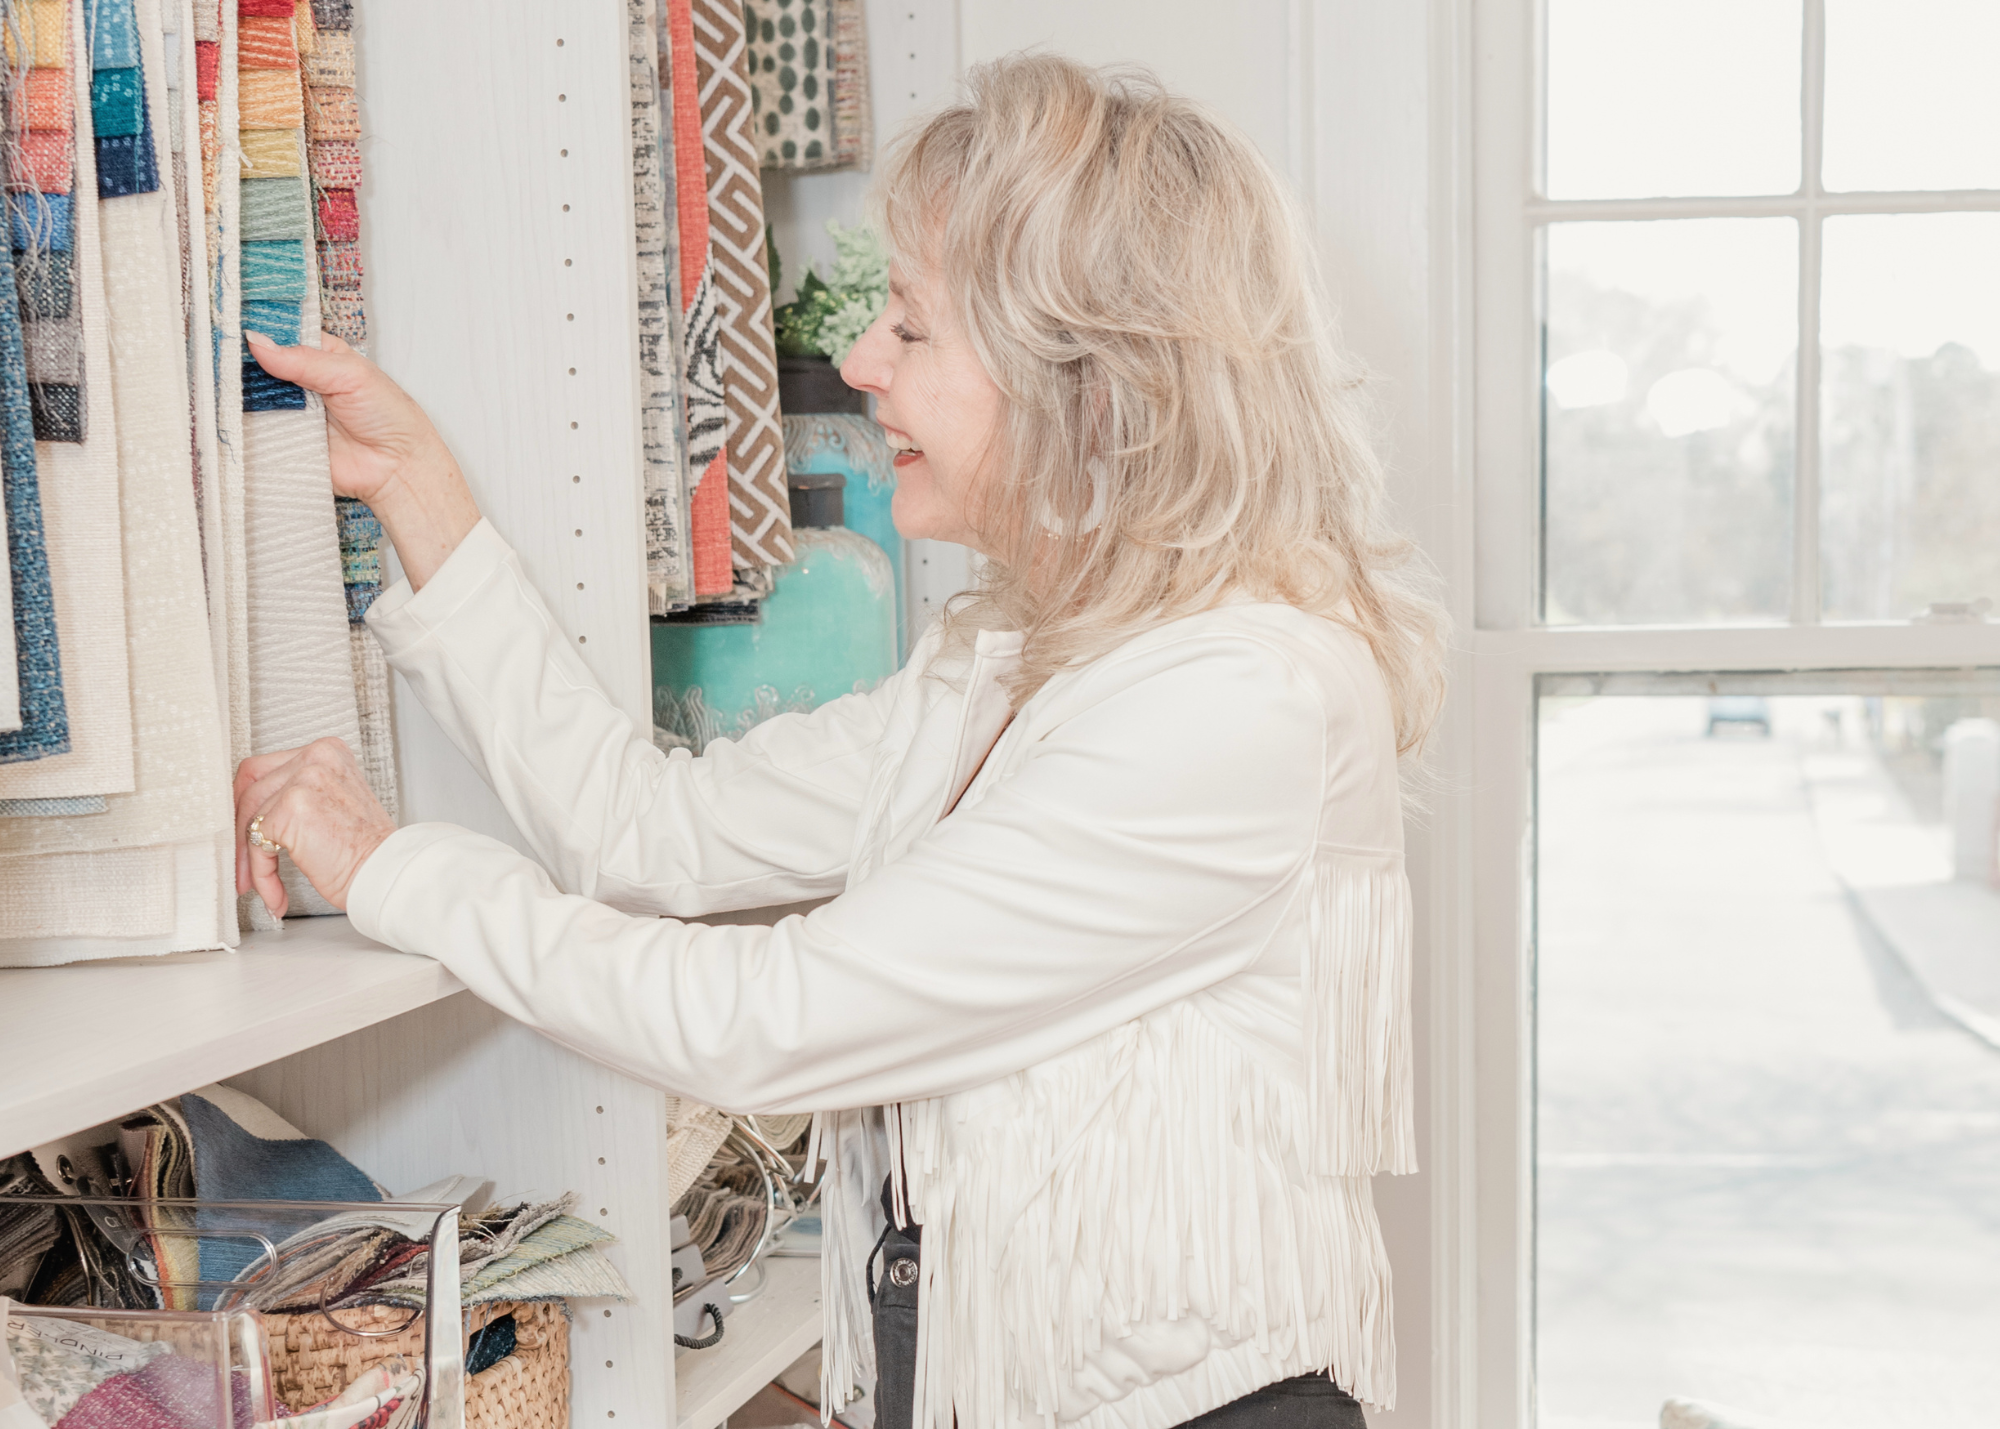 Lori Savio, Interior Designer and Owner of Home, Heart & Soul, smiling while looking through fabric samples